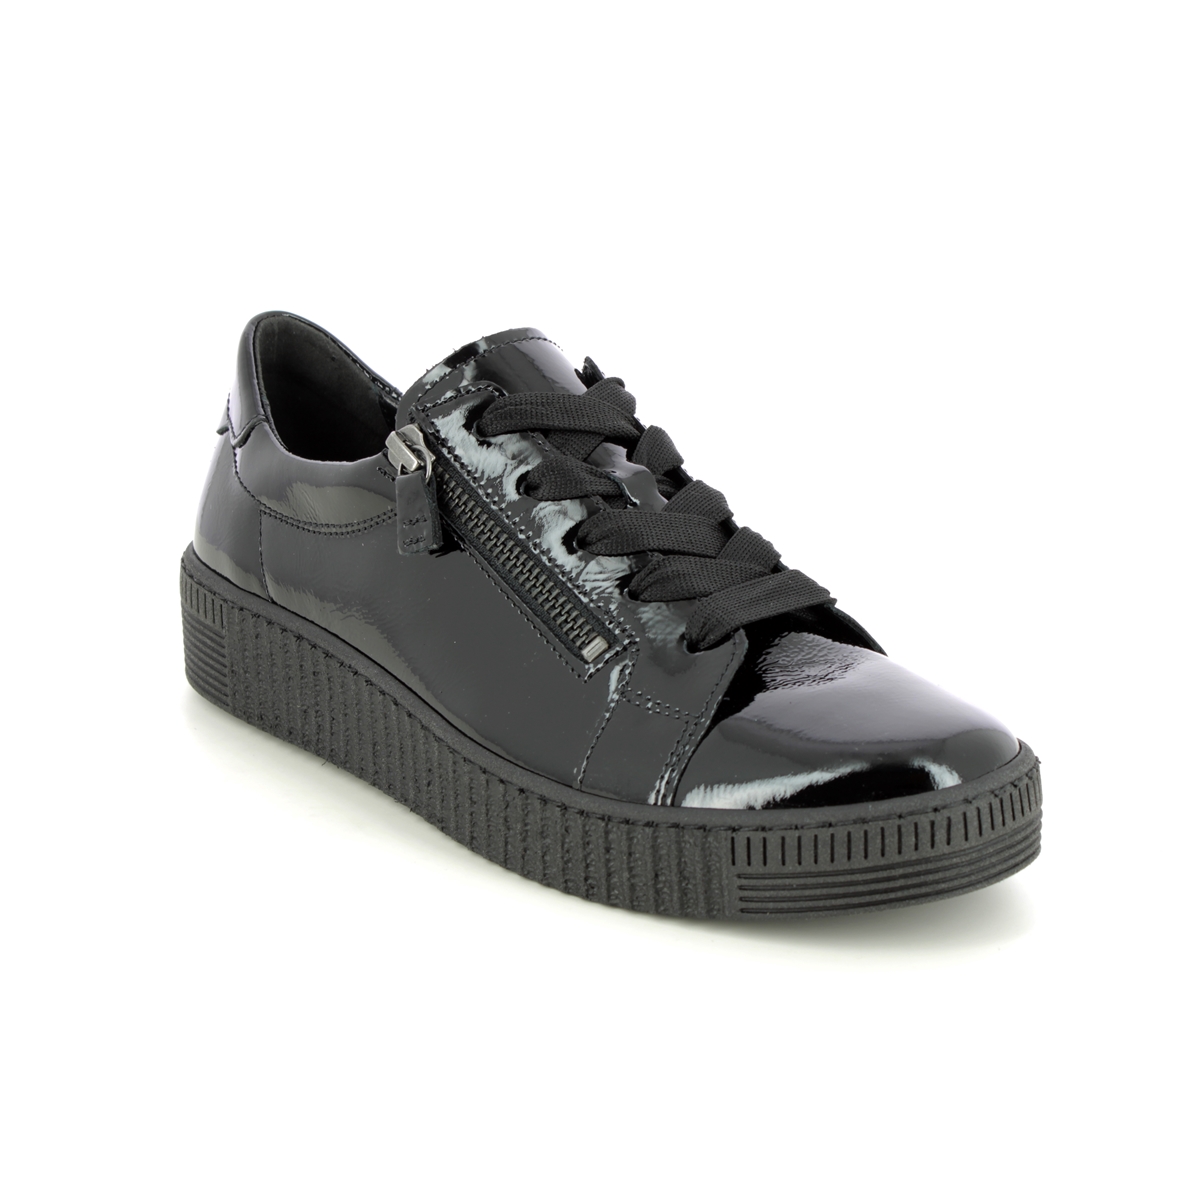 Gabor Wisdom Black Patent Womens Trainers 93.334.97 In Size 3.5 In Plain Black Patent  Womens Trainers In Soft Black Patent Leather